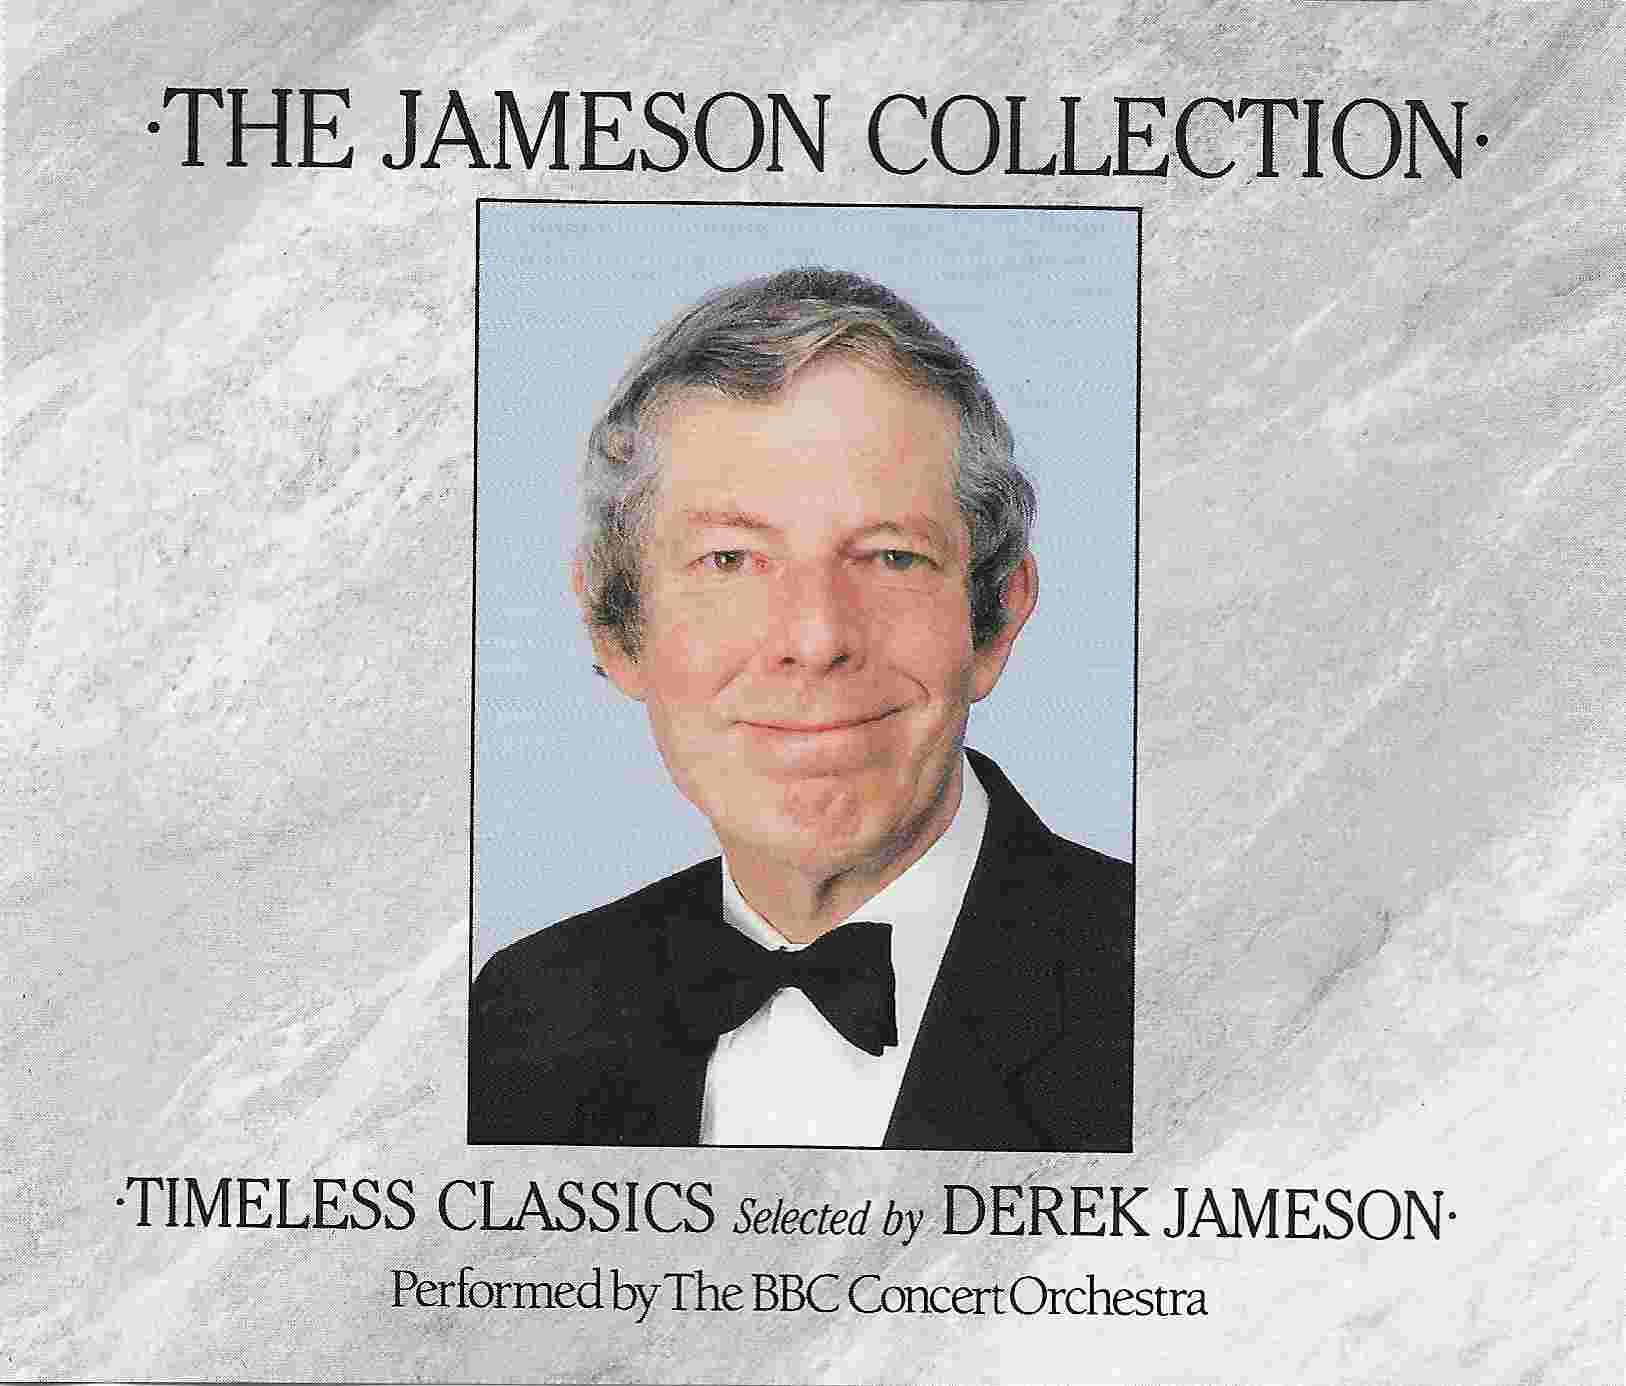 Picture of Derek Jameson collection by artist Derek Jameson  from the BBC cds - Records and Tapes library